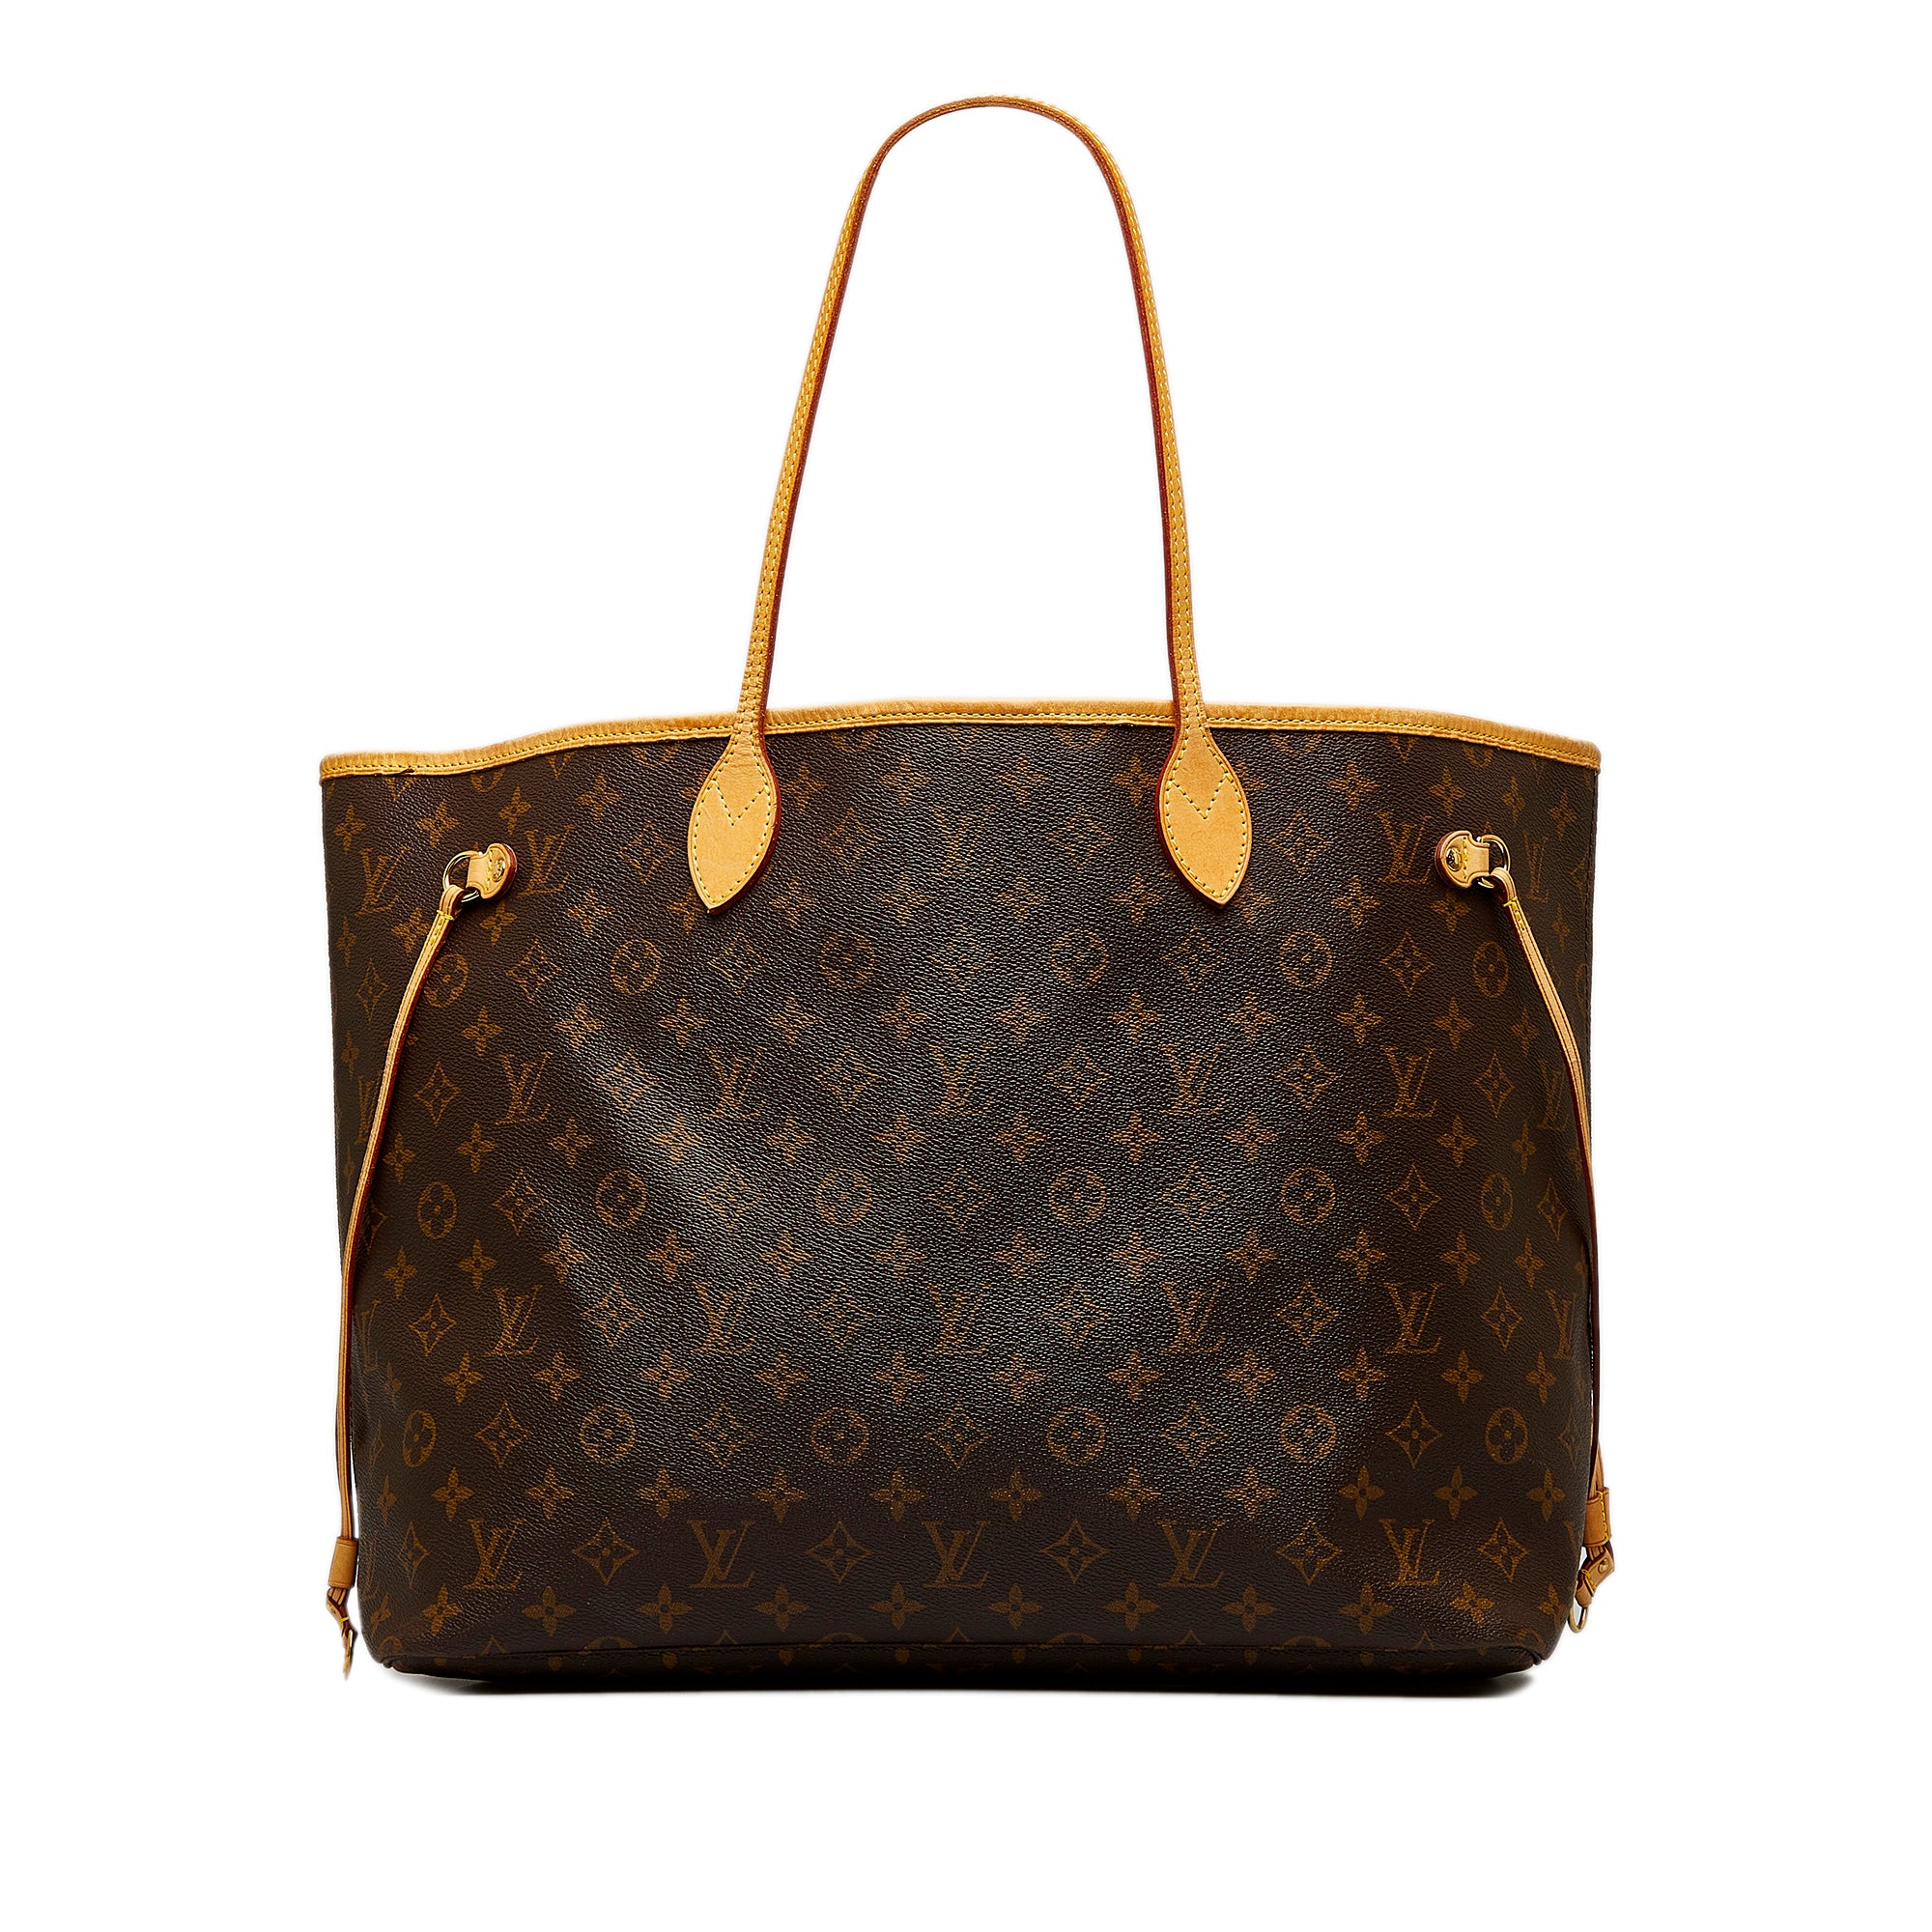 Louis Vuitton Airbus second hand prices